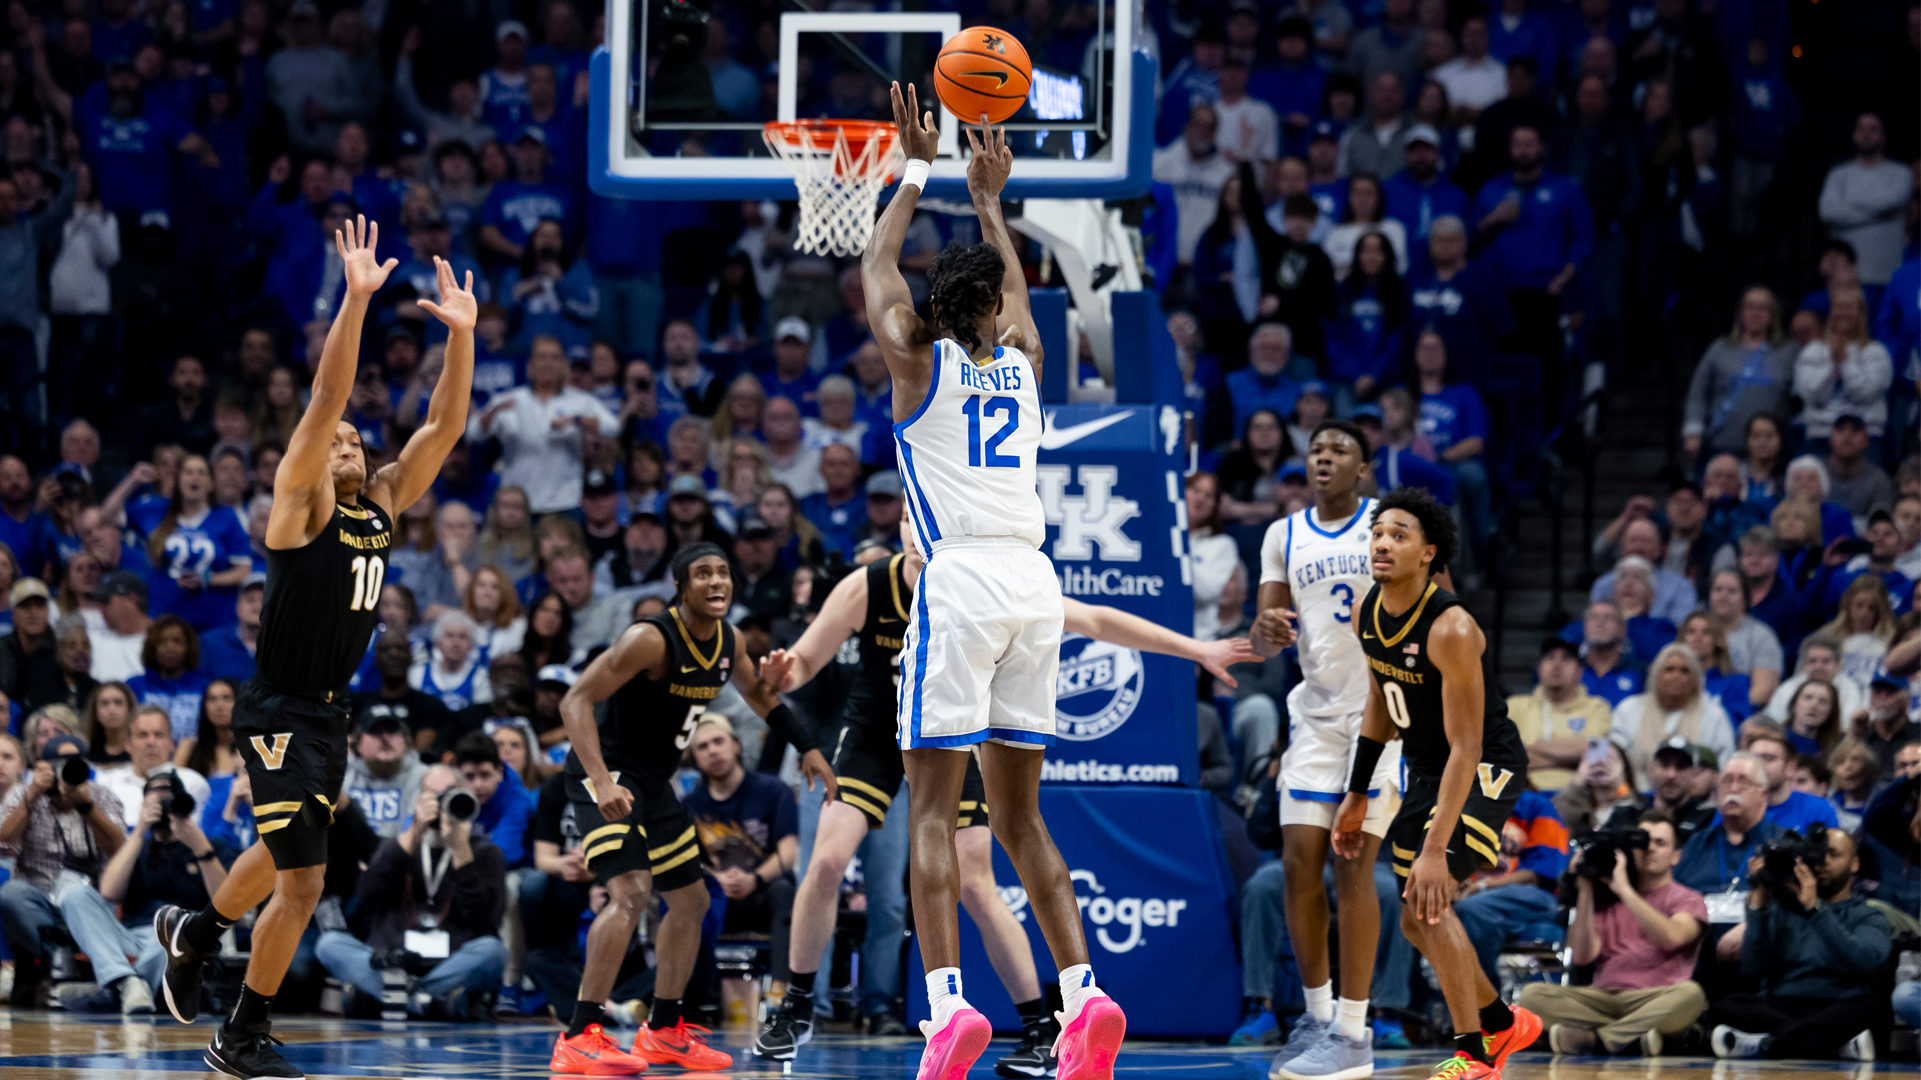 Antonio Reeves to Participate in Final Four 3-Point Contest